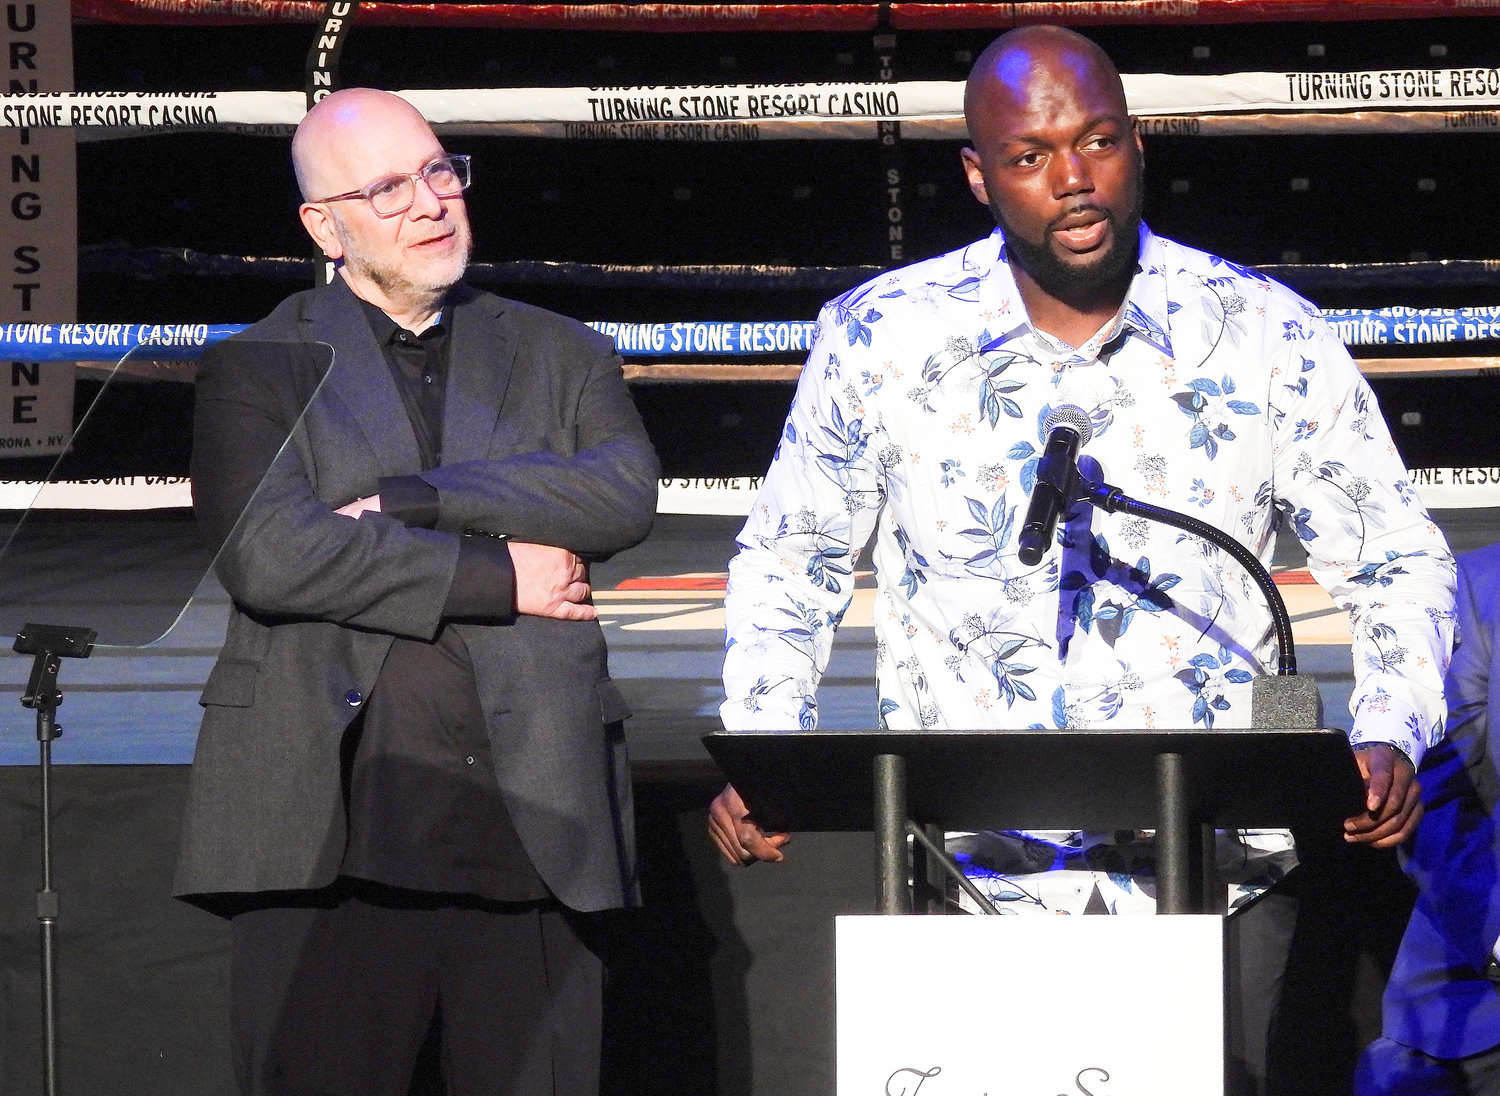 After being introduced by boxing promoter Lou DiBella, boxer Jack Mulowayi speaks at a press conference on Thursday at the Turning Stone, kicking off the Boxing Hall of Fame Induction Weekend